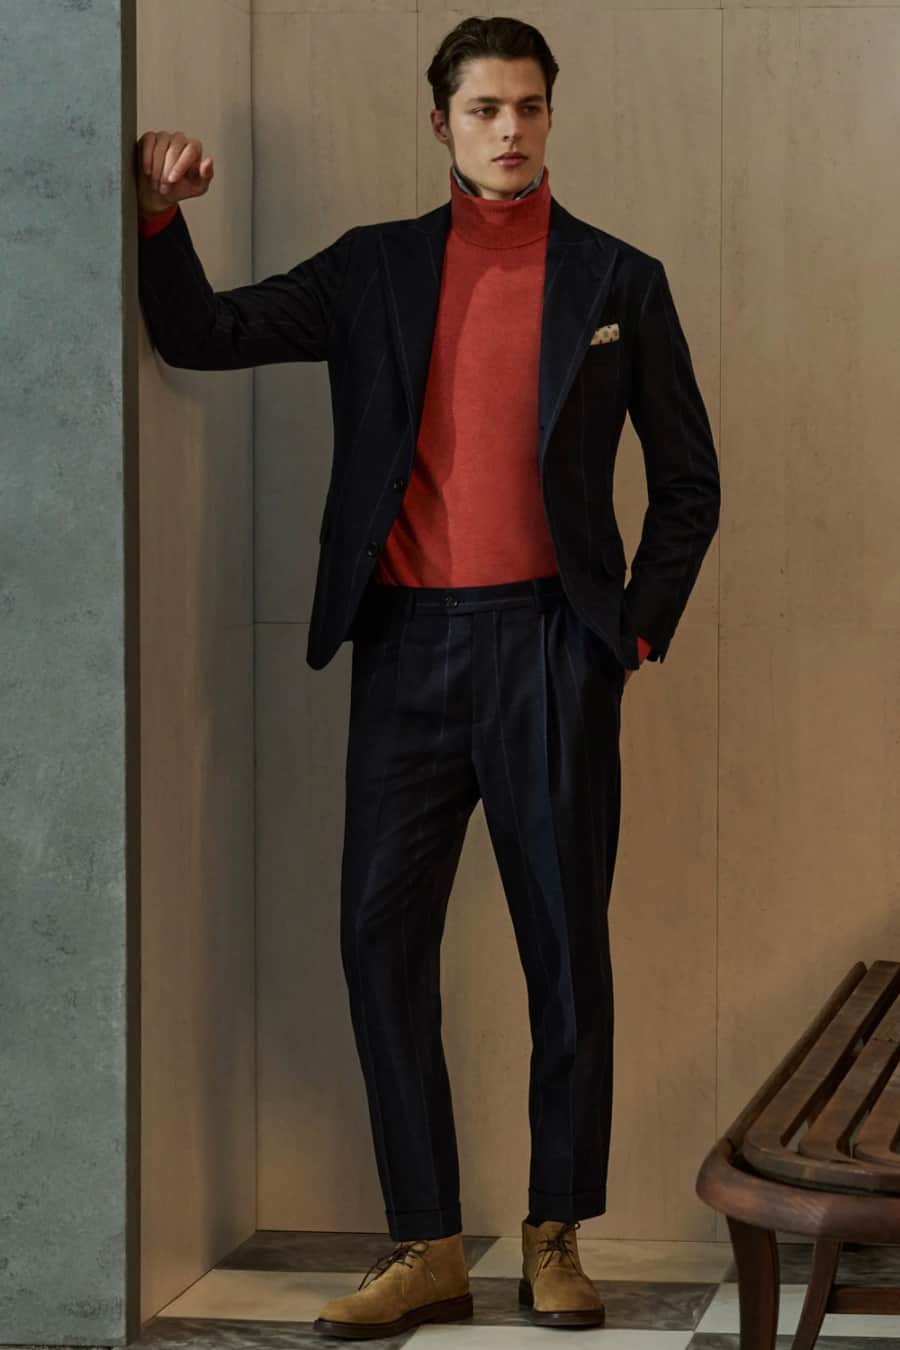 Men's dark navy suit with red turtleneck and suede chukka boots outfit